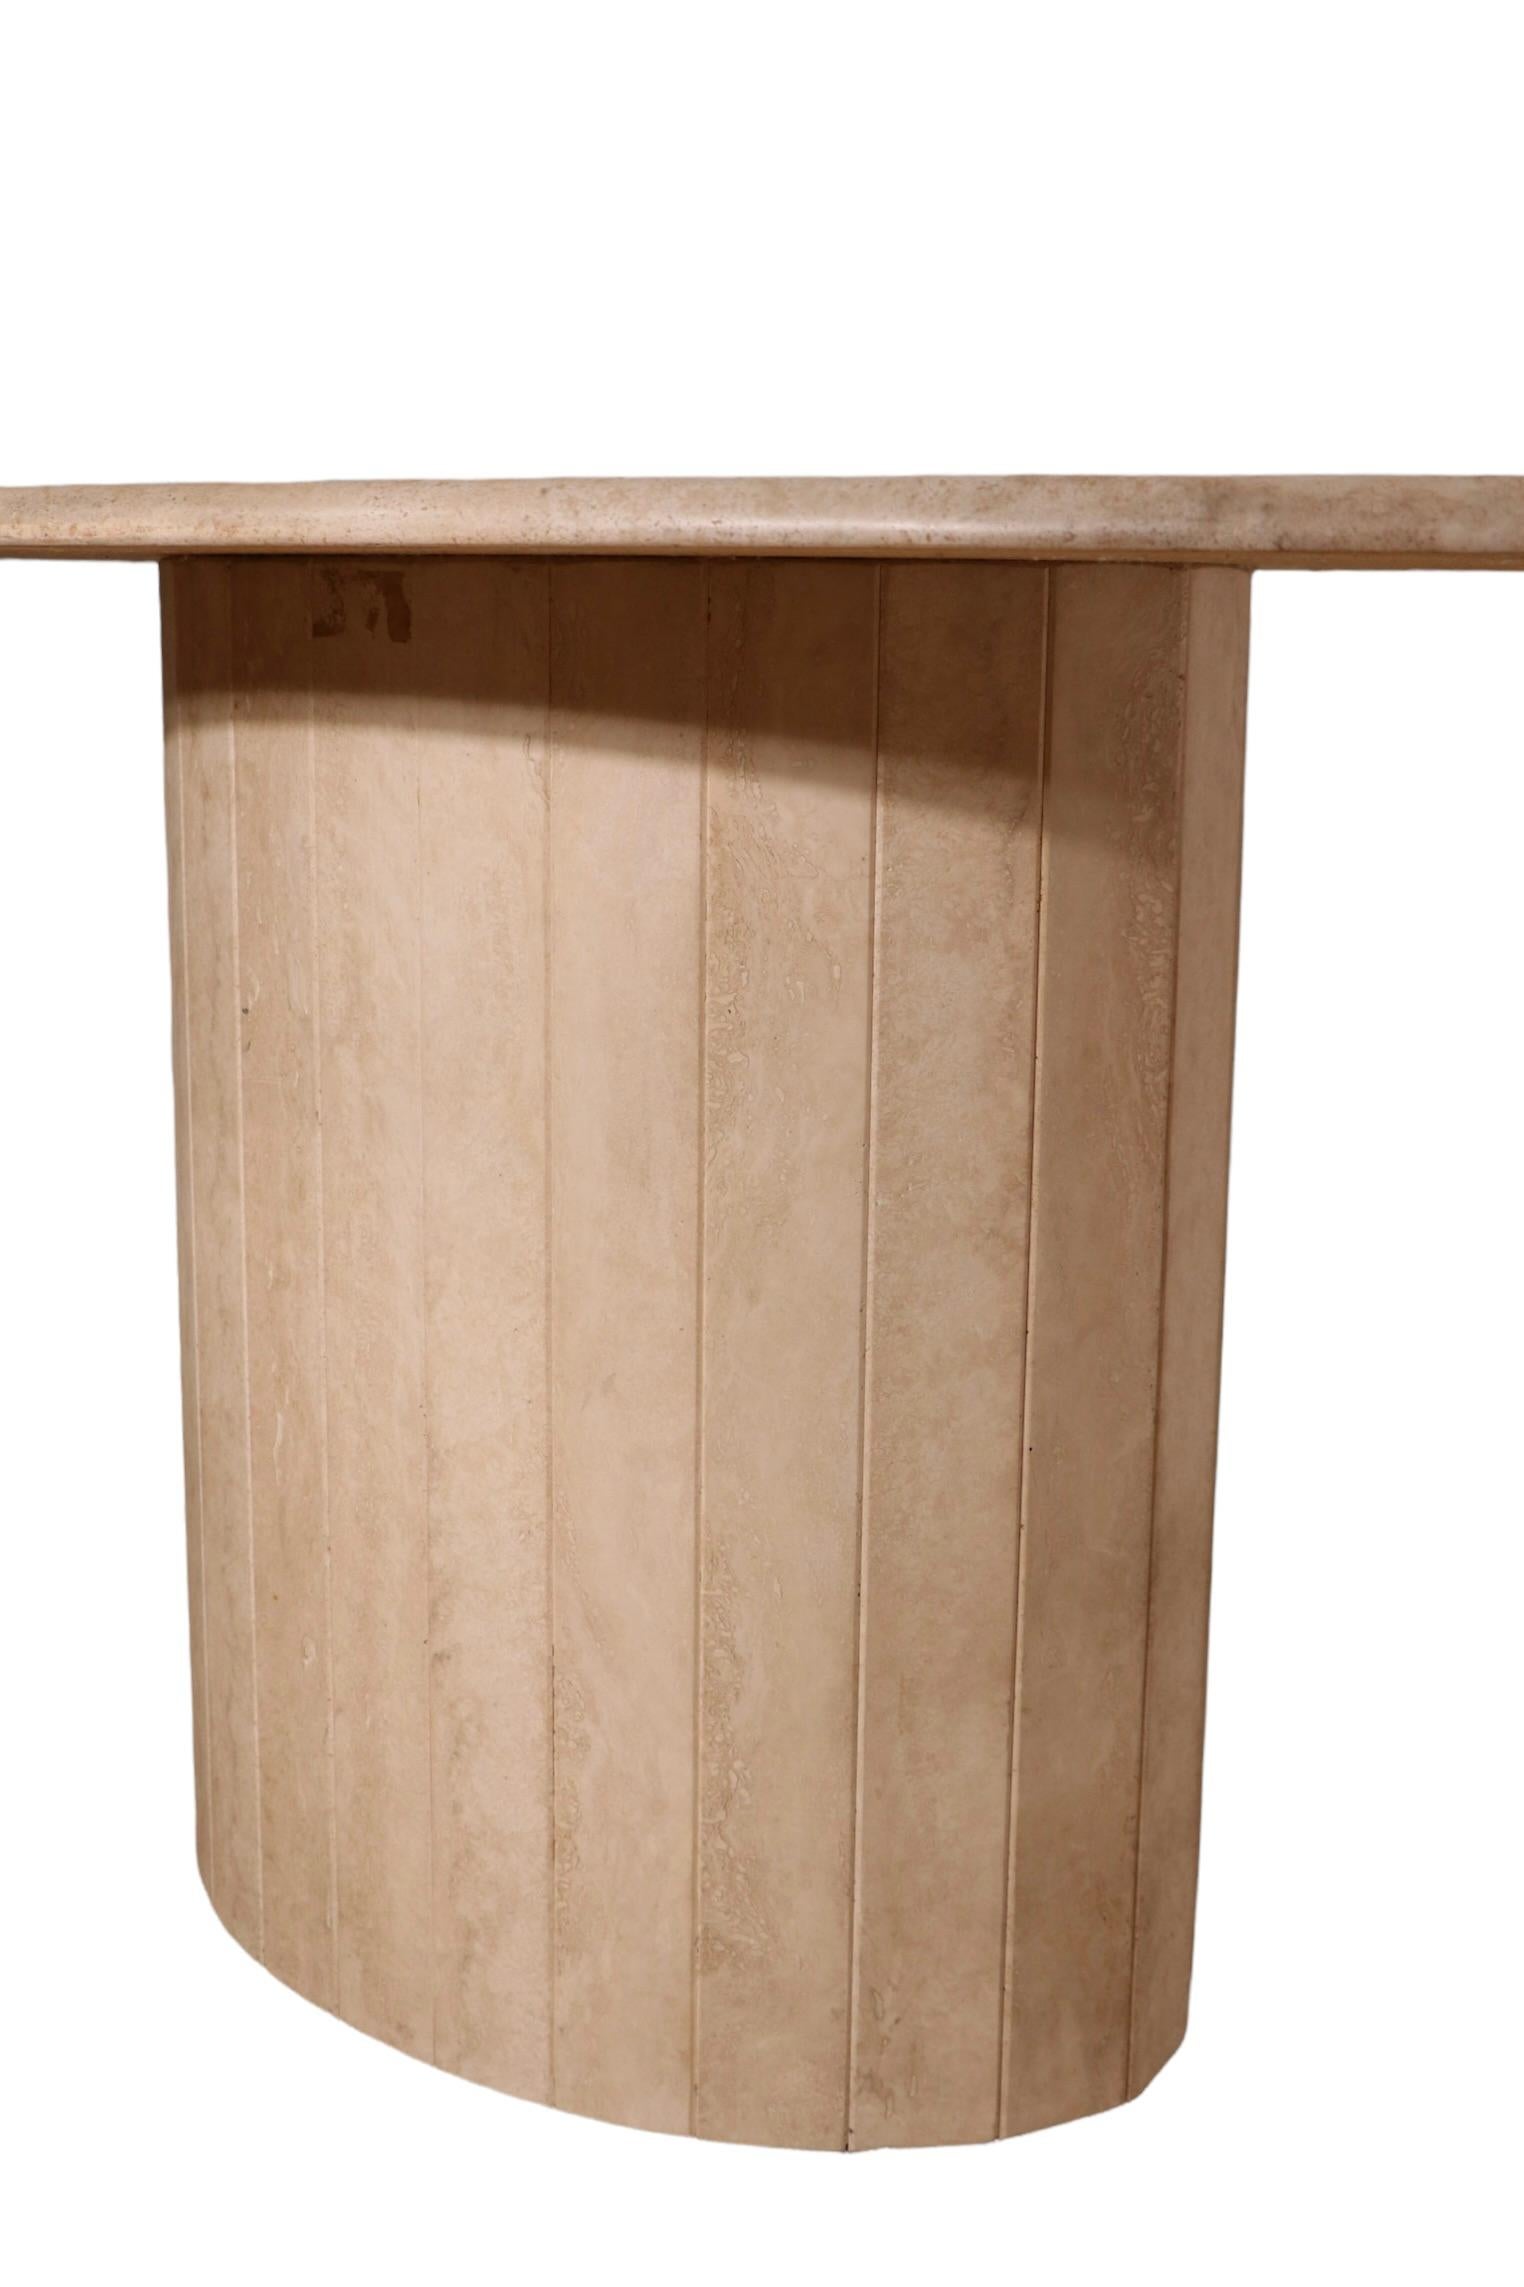 20th Century Oval Pedestal Base Travertine Marble Dining Table Made in Italy ca. 1970-1980’s